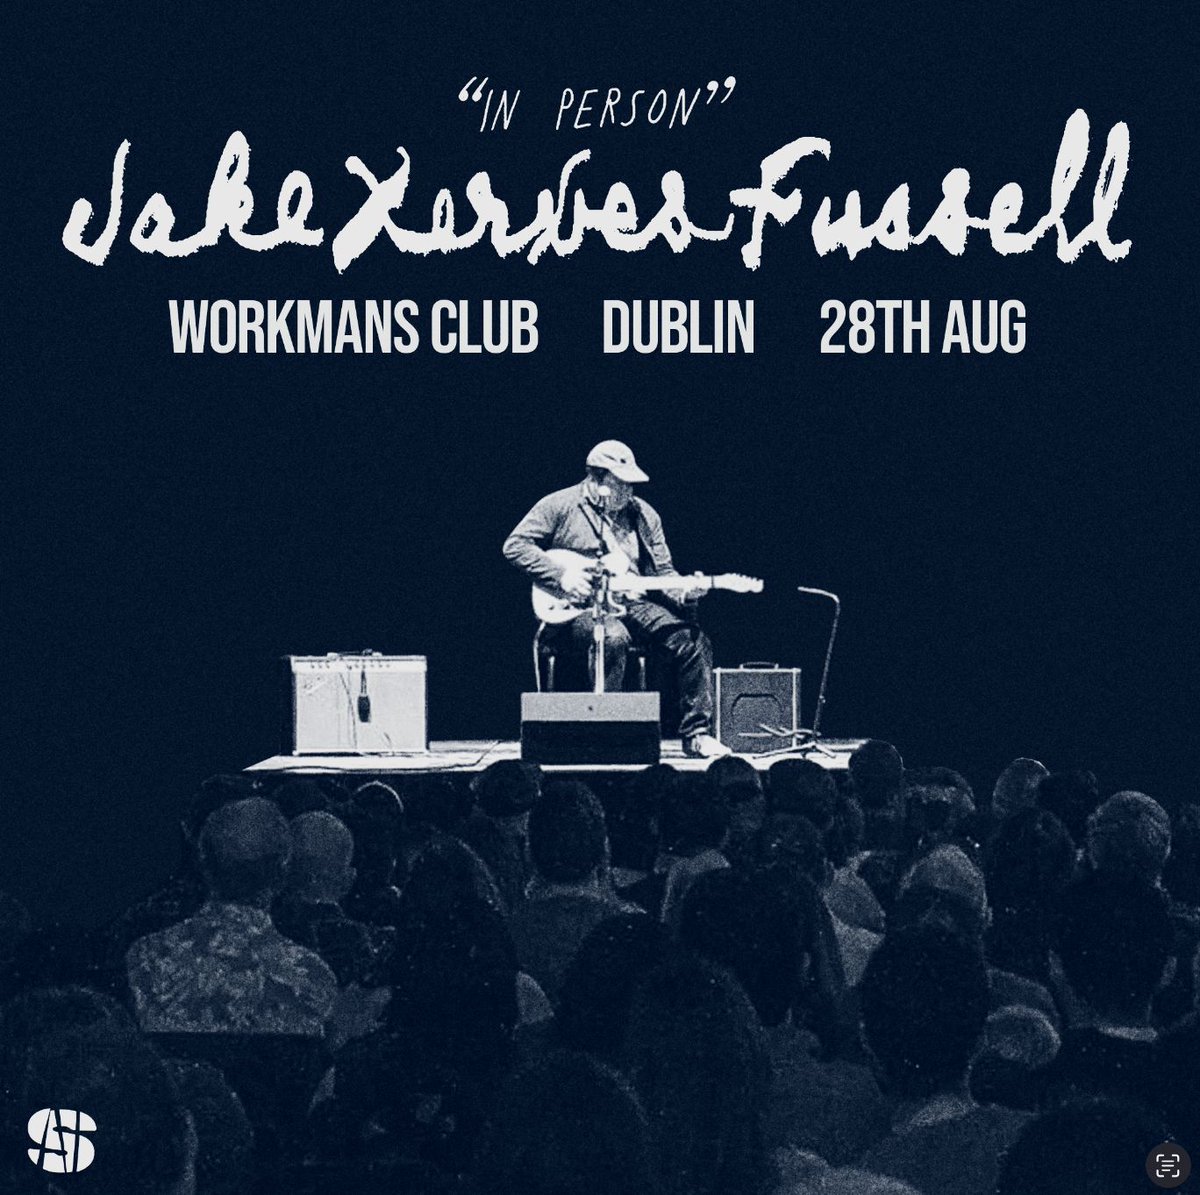 Singular Artists presents: Jake Xerxes Fussell 28th August 7:30pm, Main venue Tickets €21.50 including booking fees available now via singularartists.ie